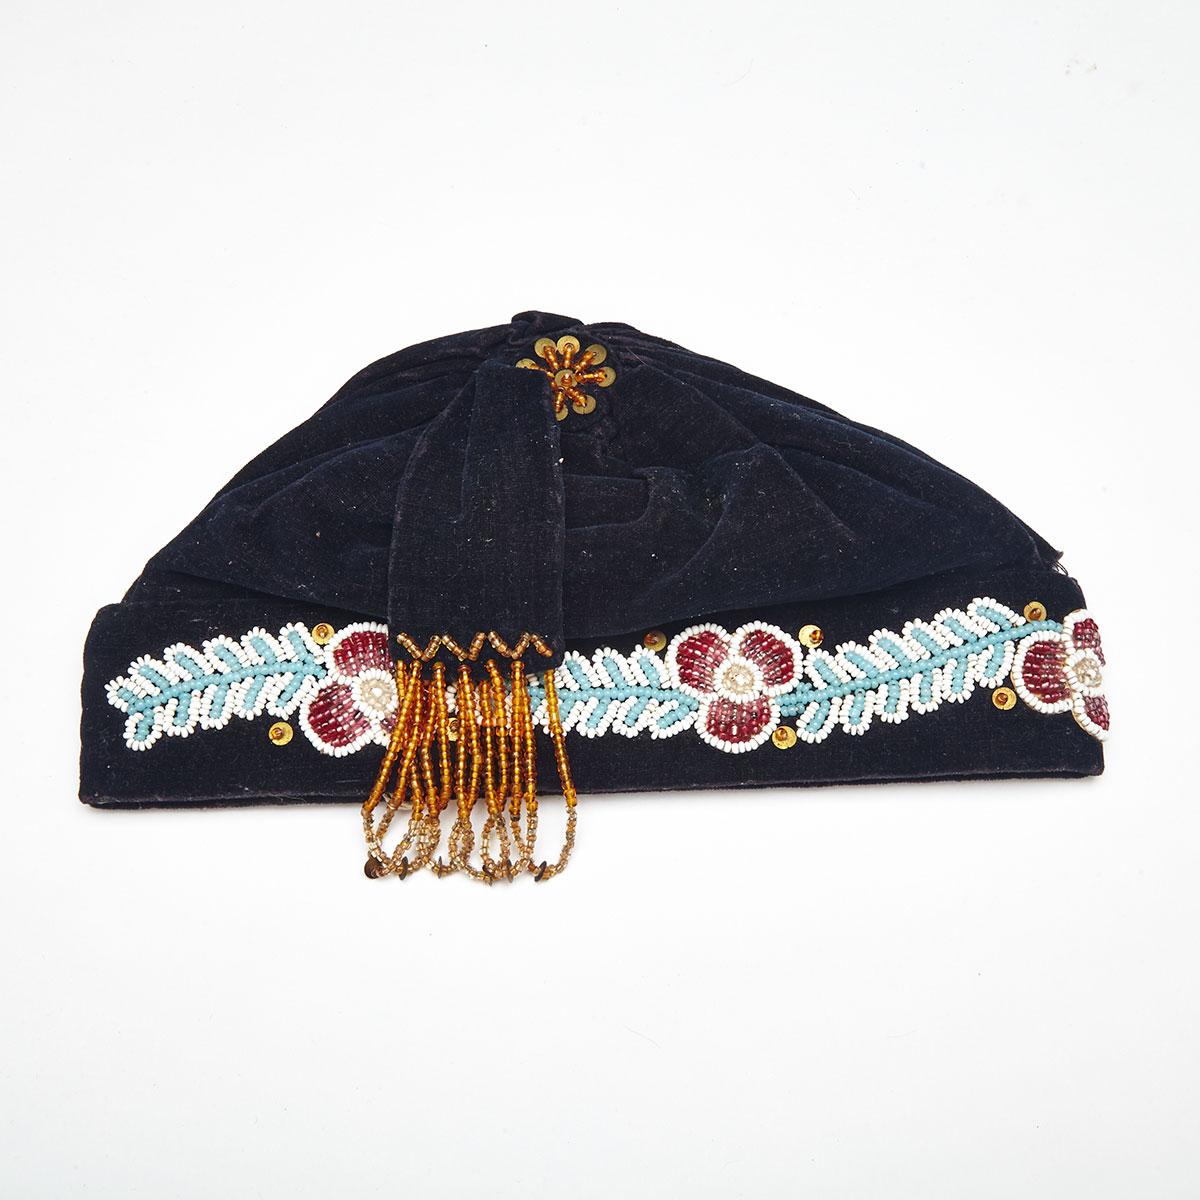 Mi’kmaq (Micmac) Indian Beaded Velvet Hat, 19th or early 20th century